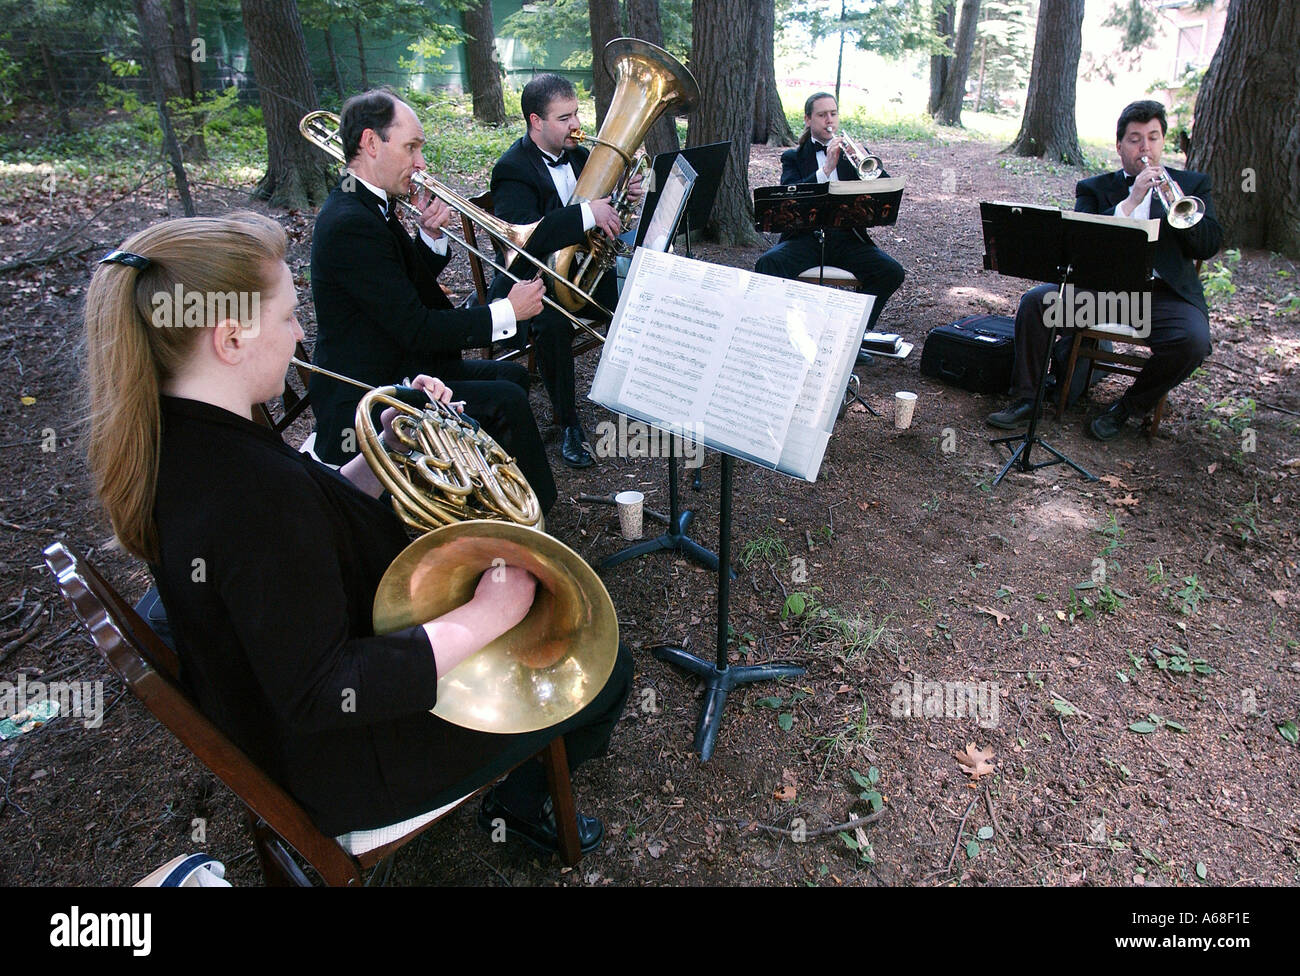 A group plays classical music under the trees at an outdoor reception Stock Photo